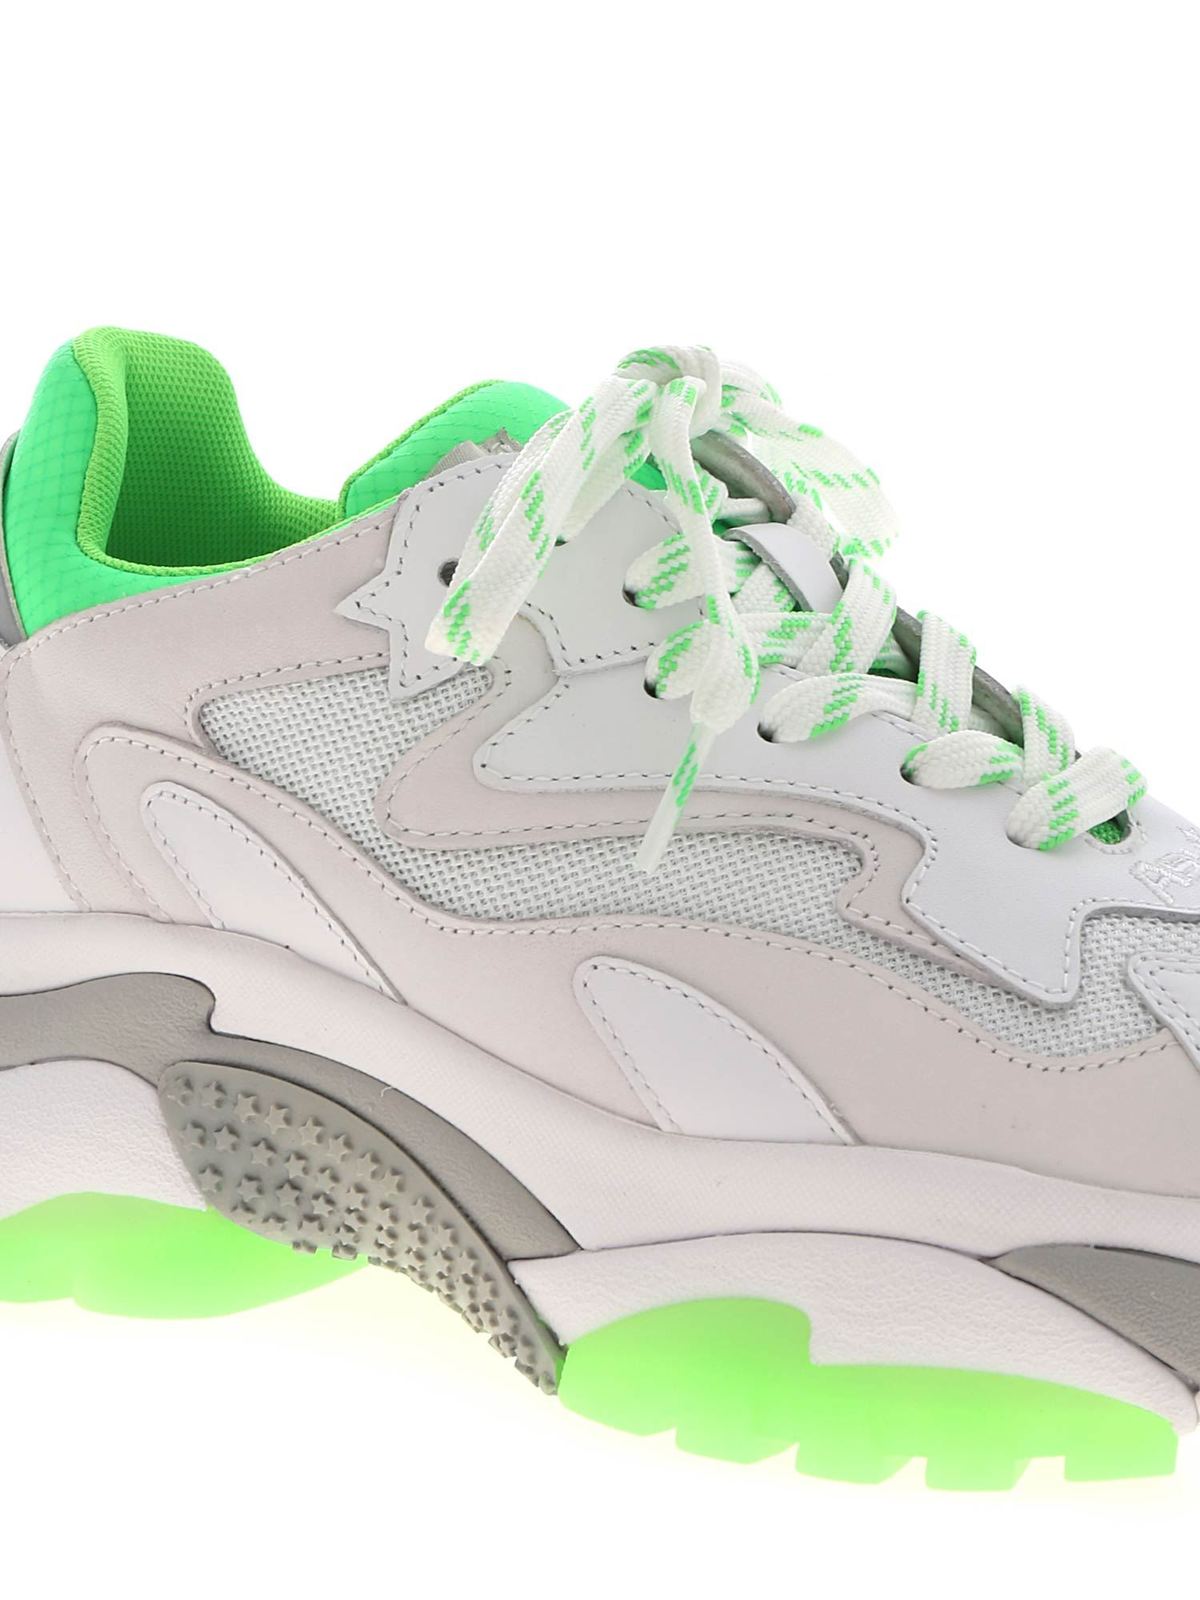 Inhalere Tablet overalt Trainers Ash - Addict sneakers in white and green - ADDICTSS20S126379004